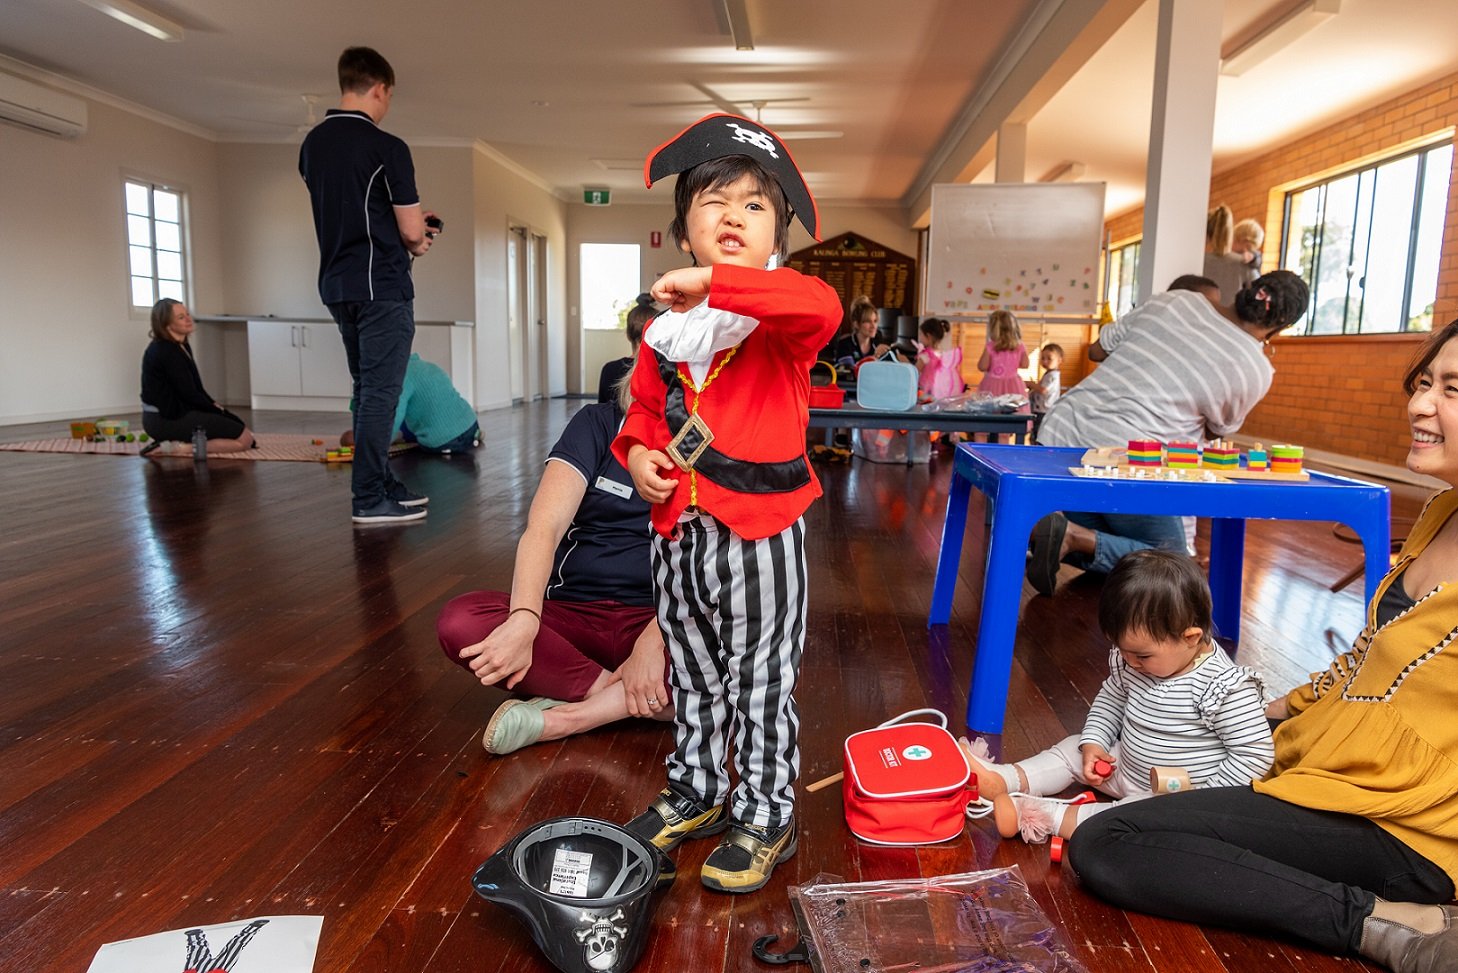 Child dressed up as a pirate enjoying imaginative play